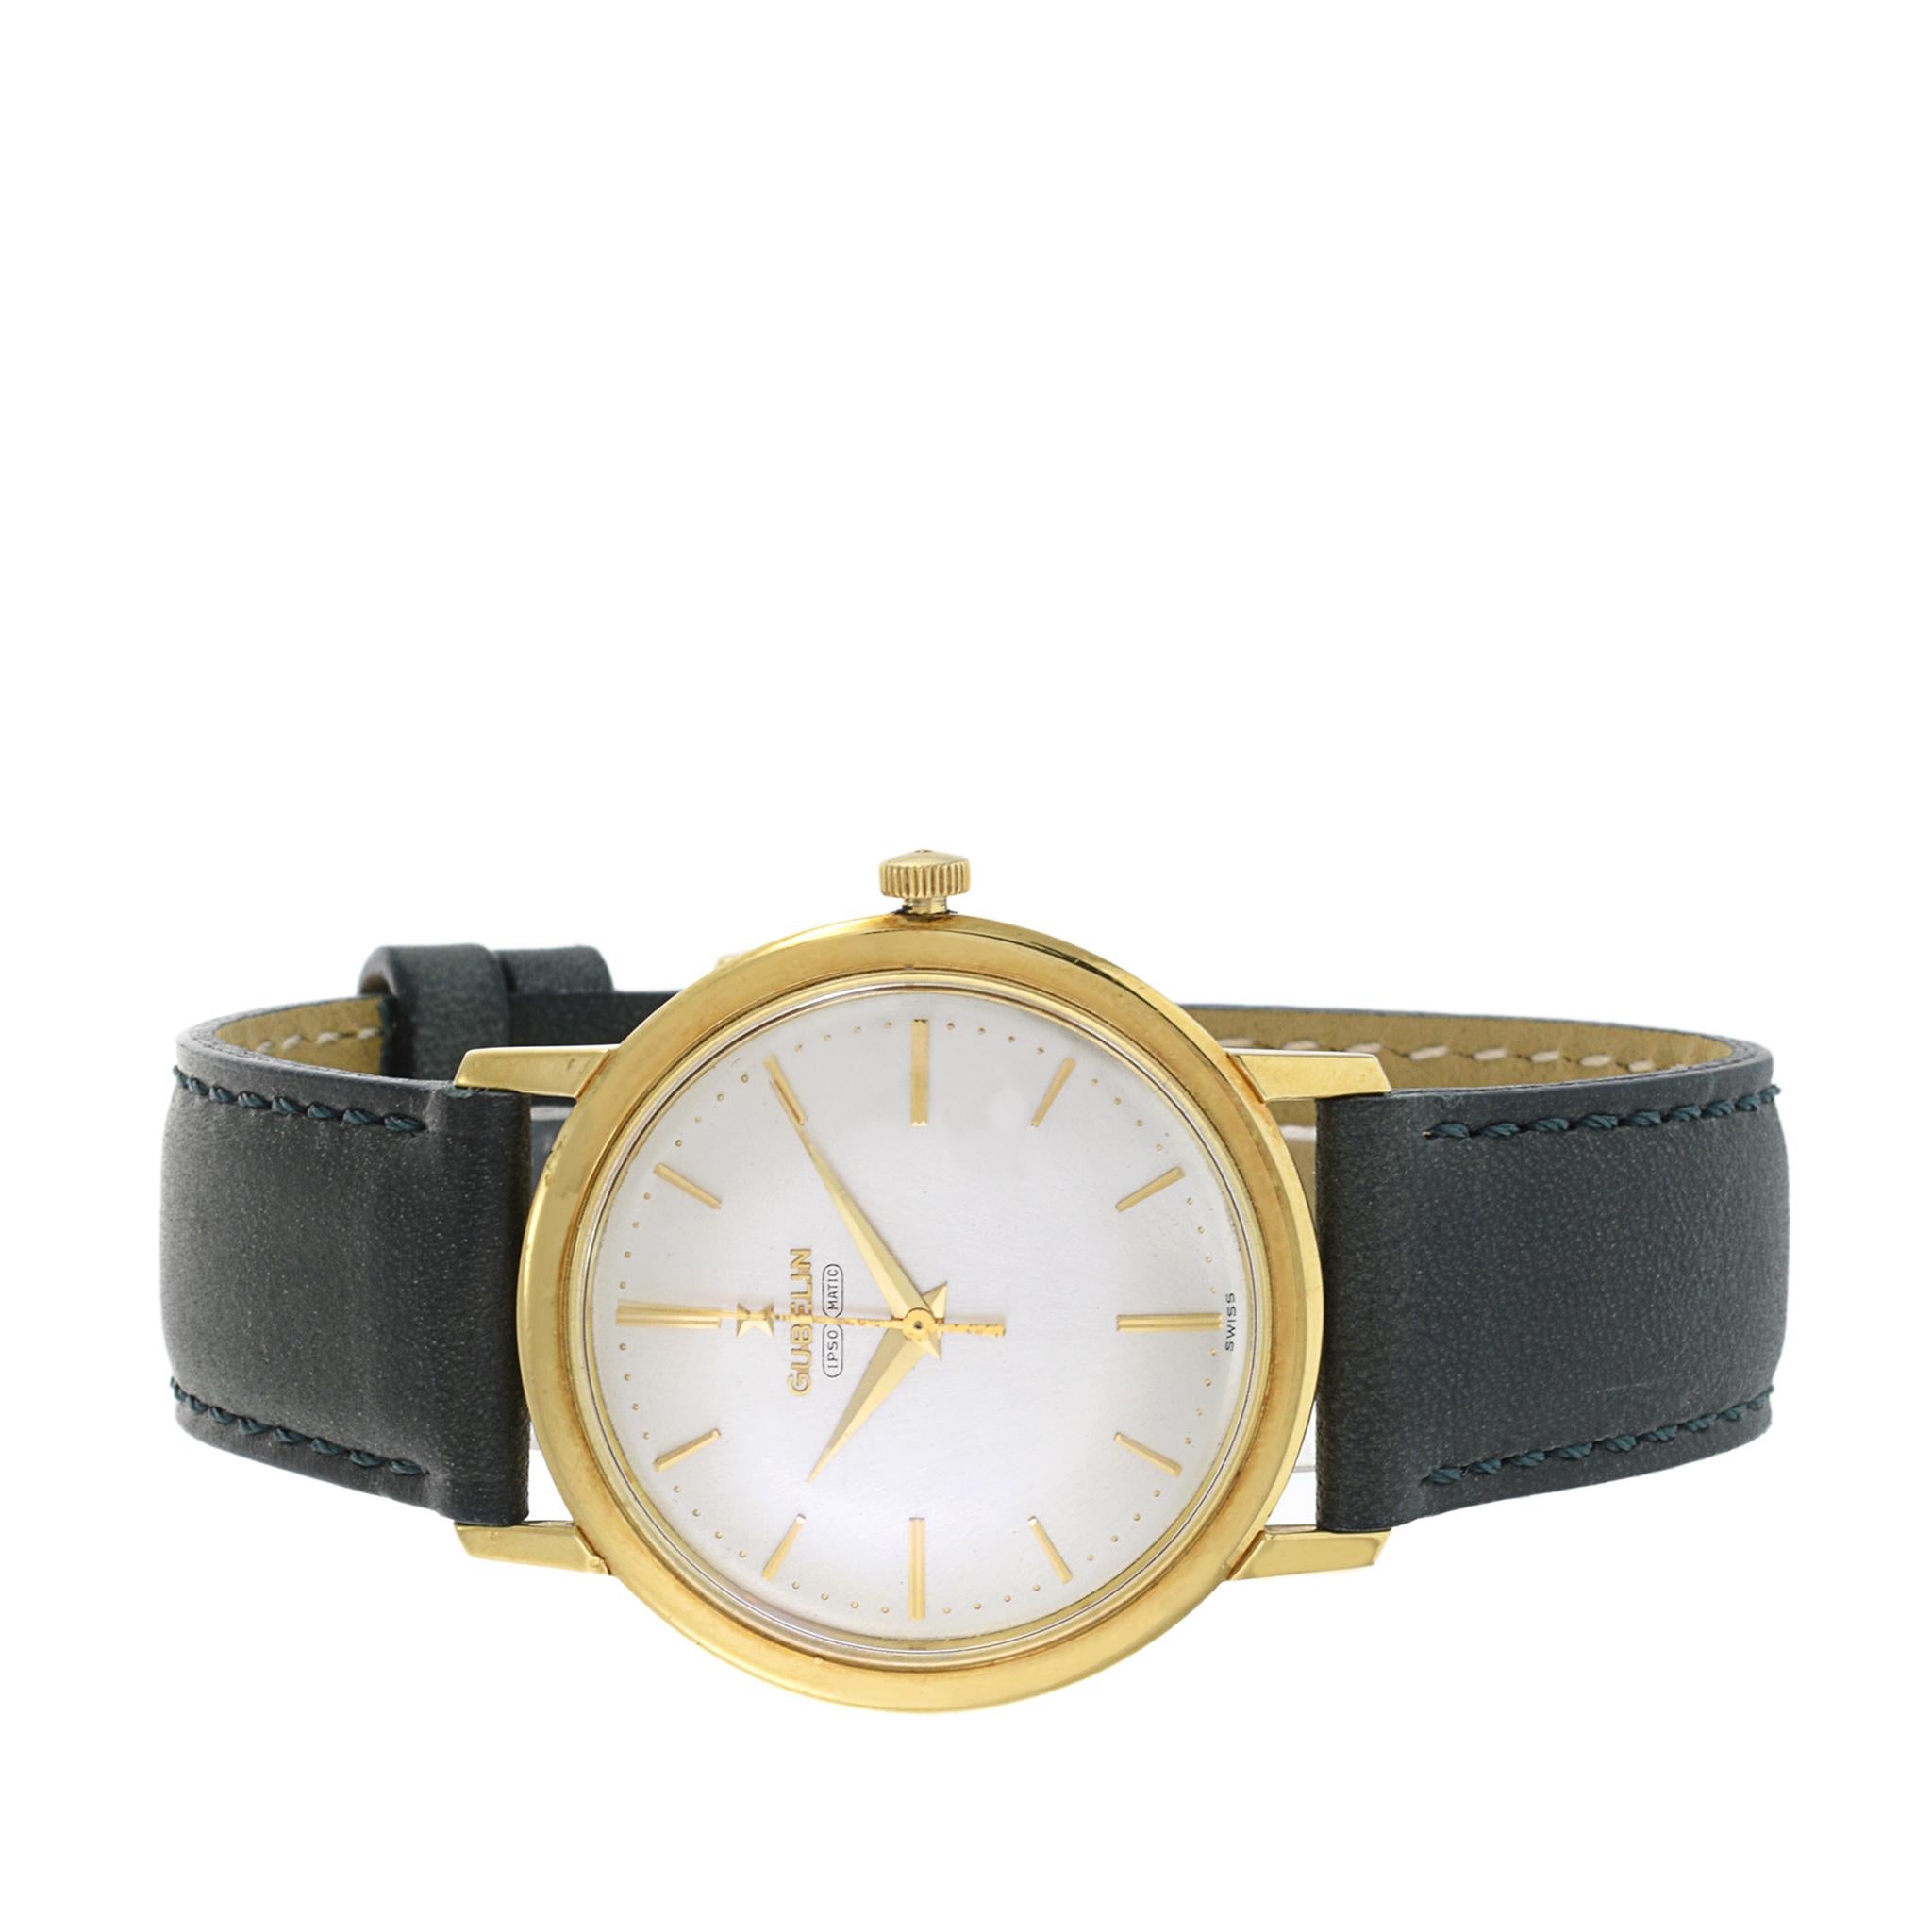 Retro Gubelin Ipso Matic 18K Yellow Gold Automatic Watch For Sale